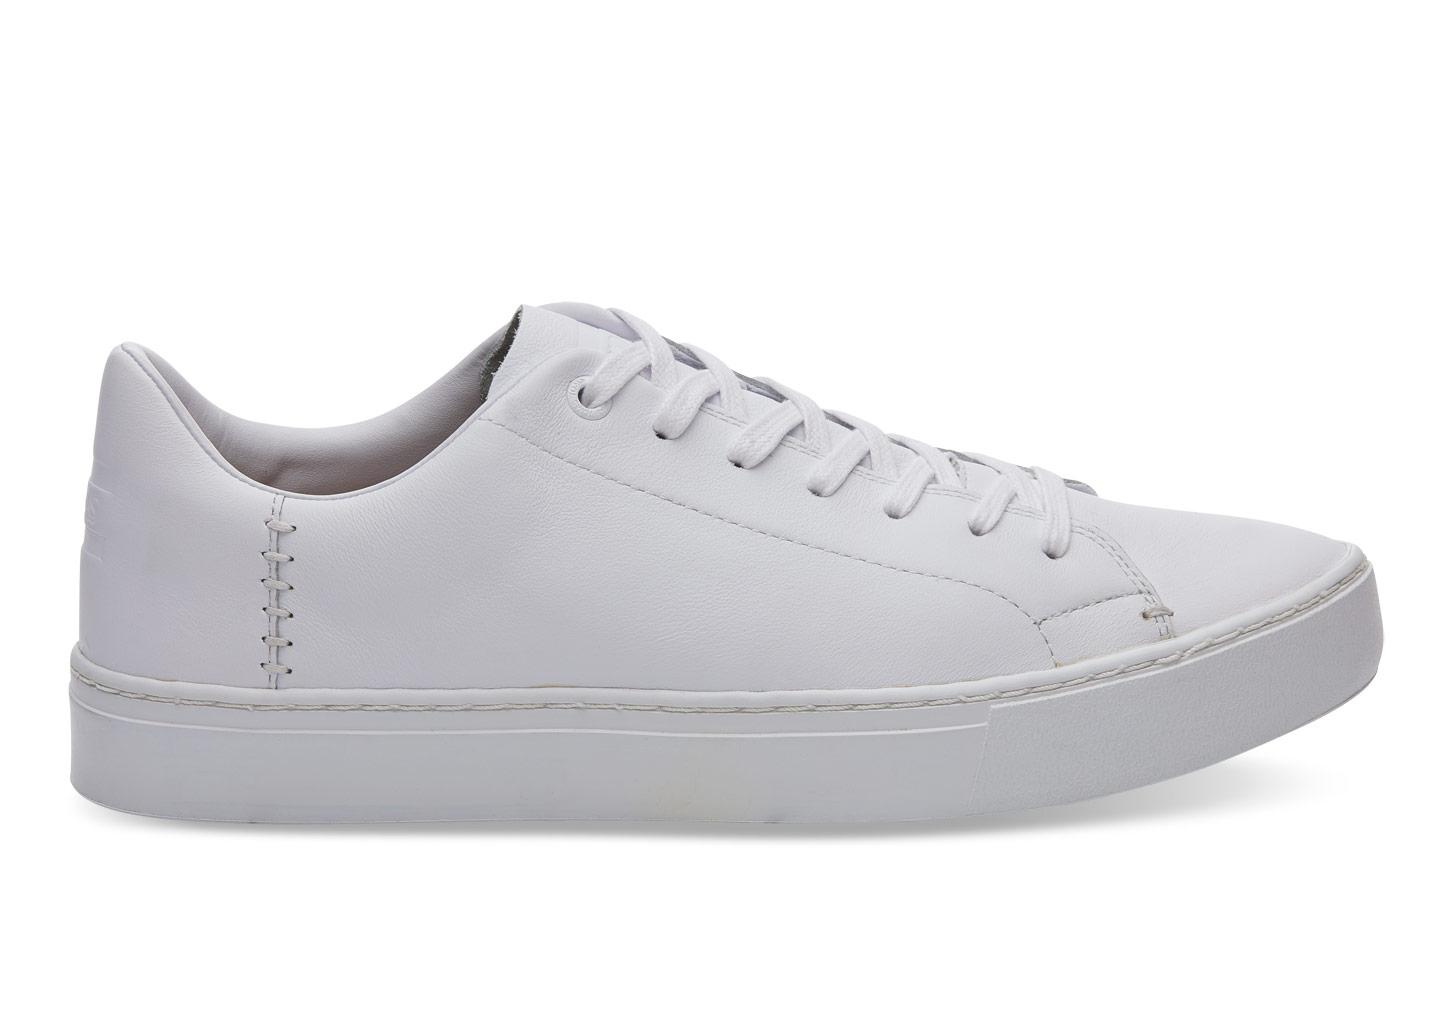 TOMS White Leather Men's Lenox Sneakers 